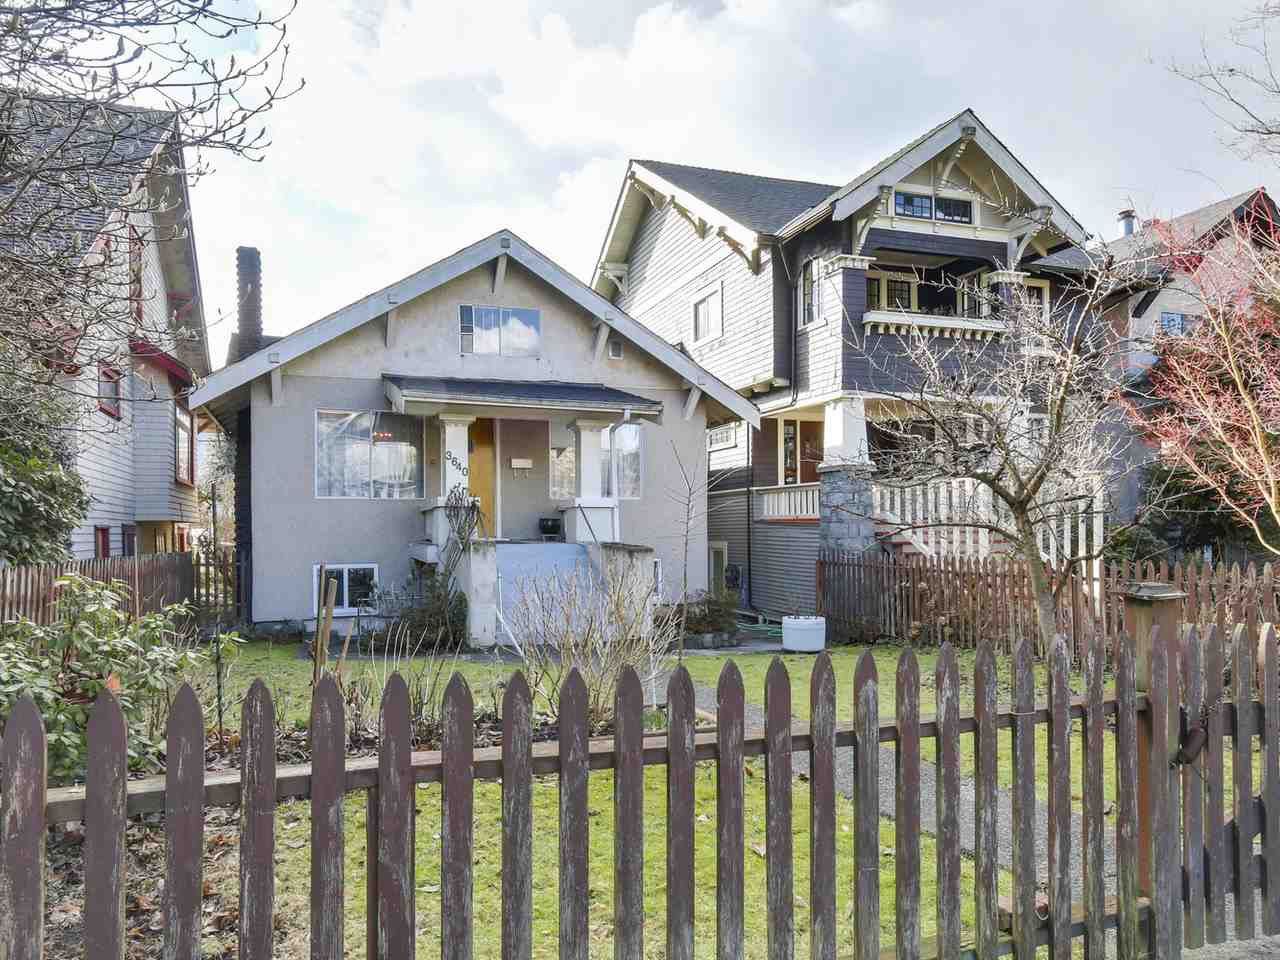 Main Photo: 3640 W 2nd Avenue in Vancouver: Kitsilano House for sale (Vancouver West)  : MLS®# R2141257